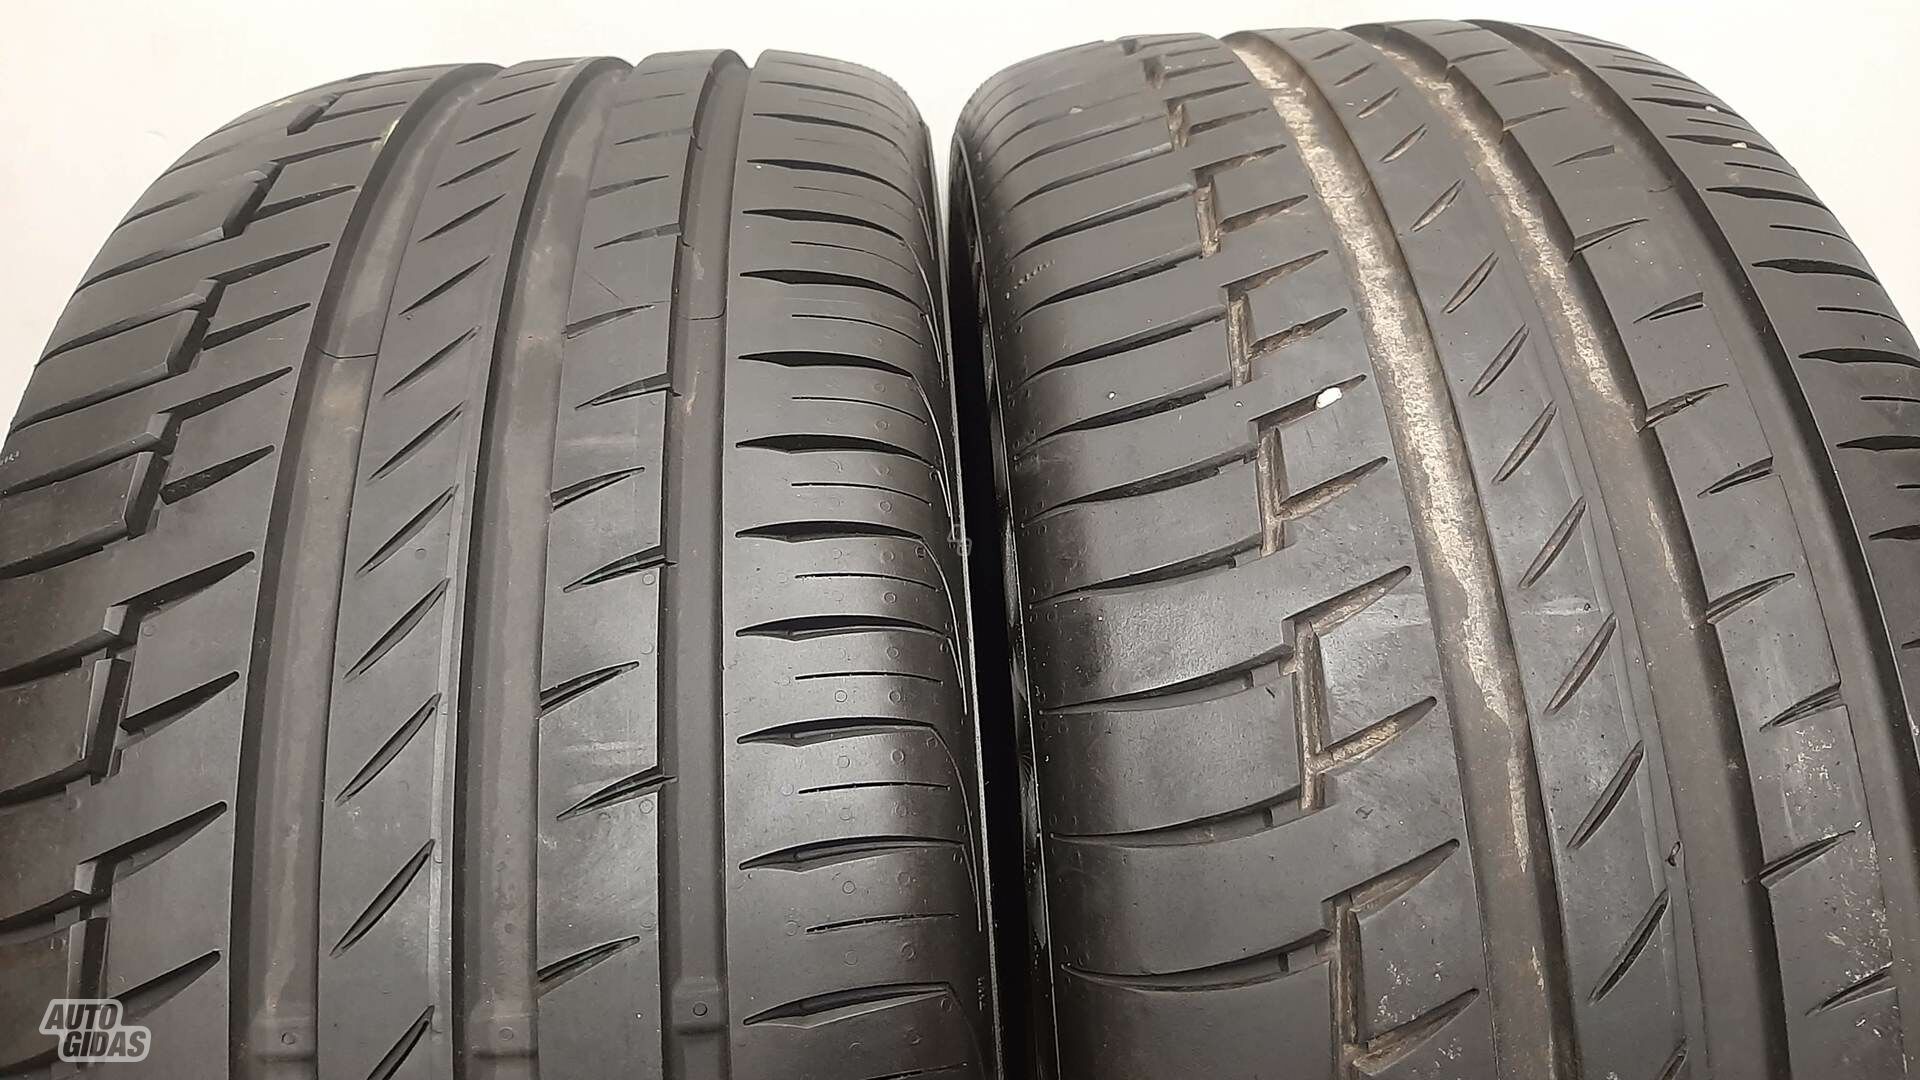 Continental PremiumContact 6 R18 summer tyres passanger car